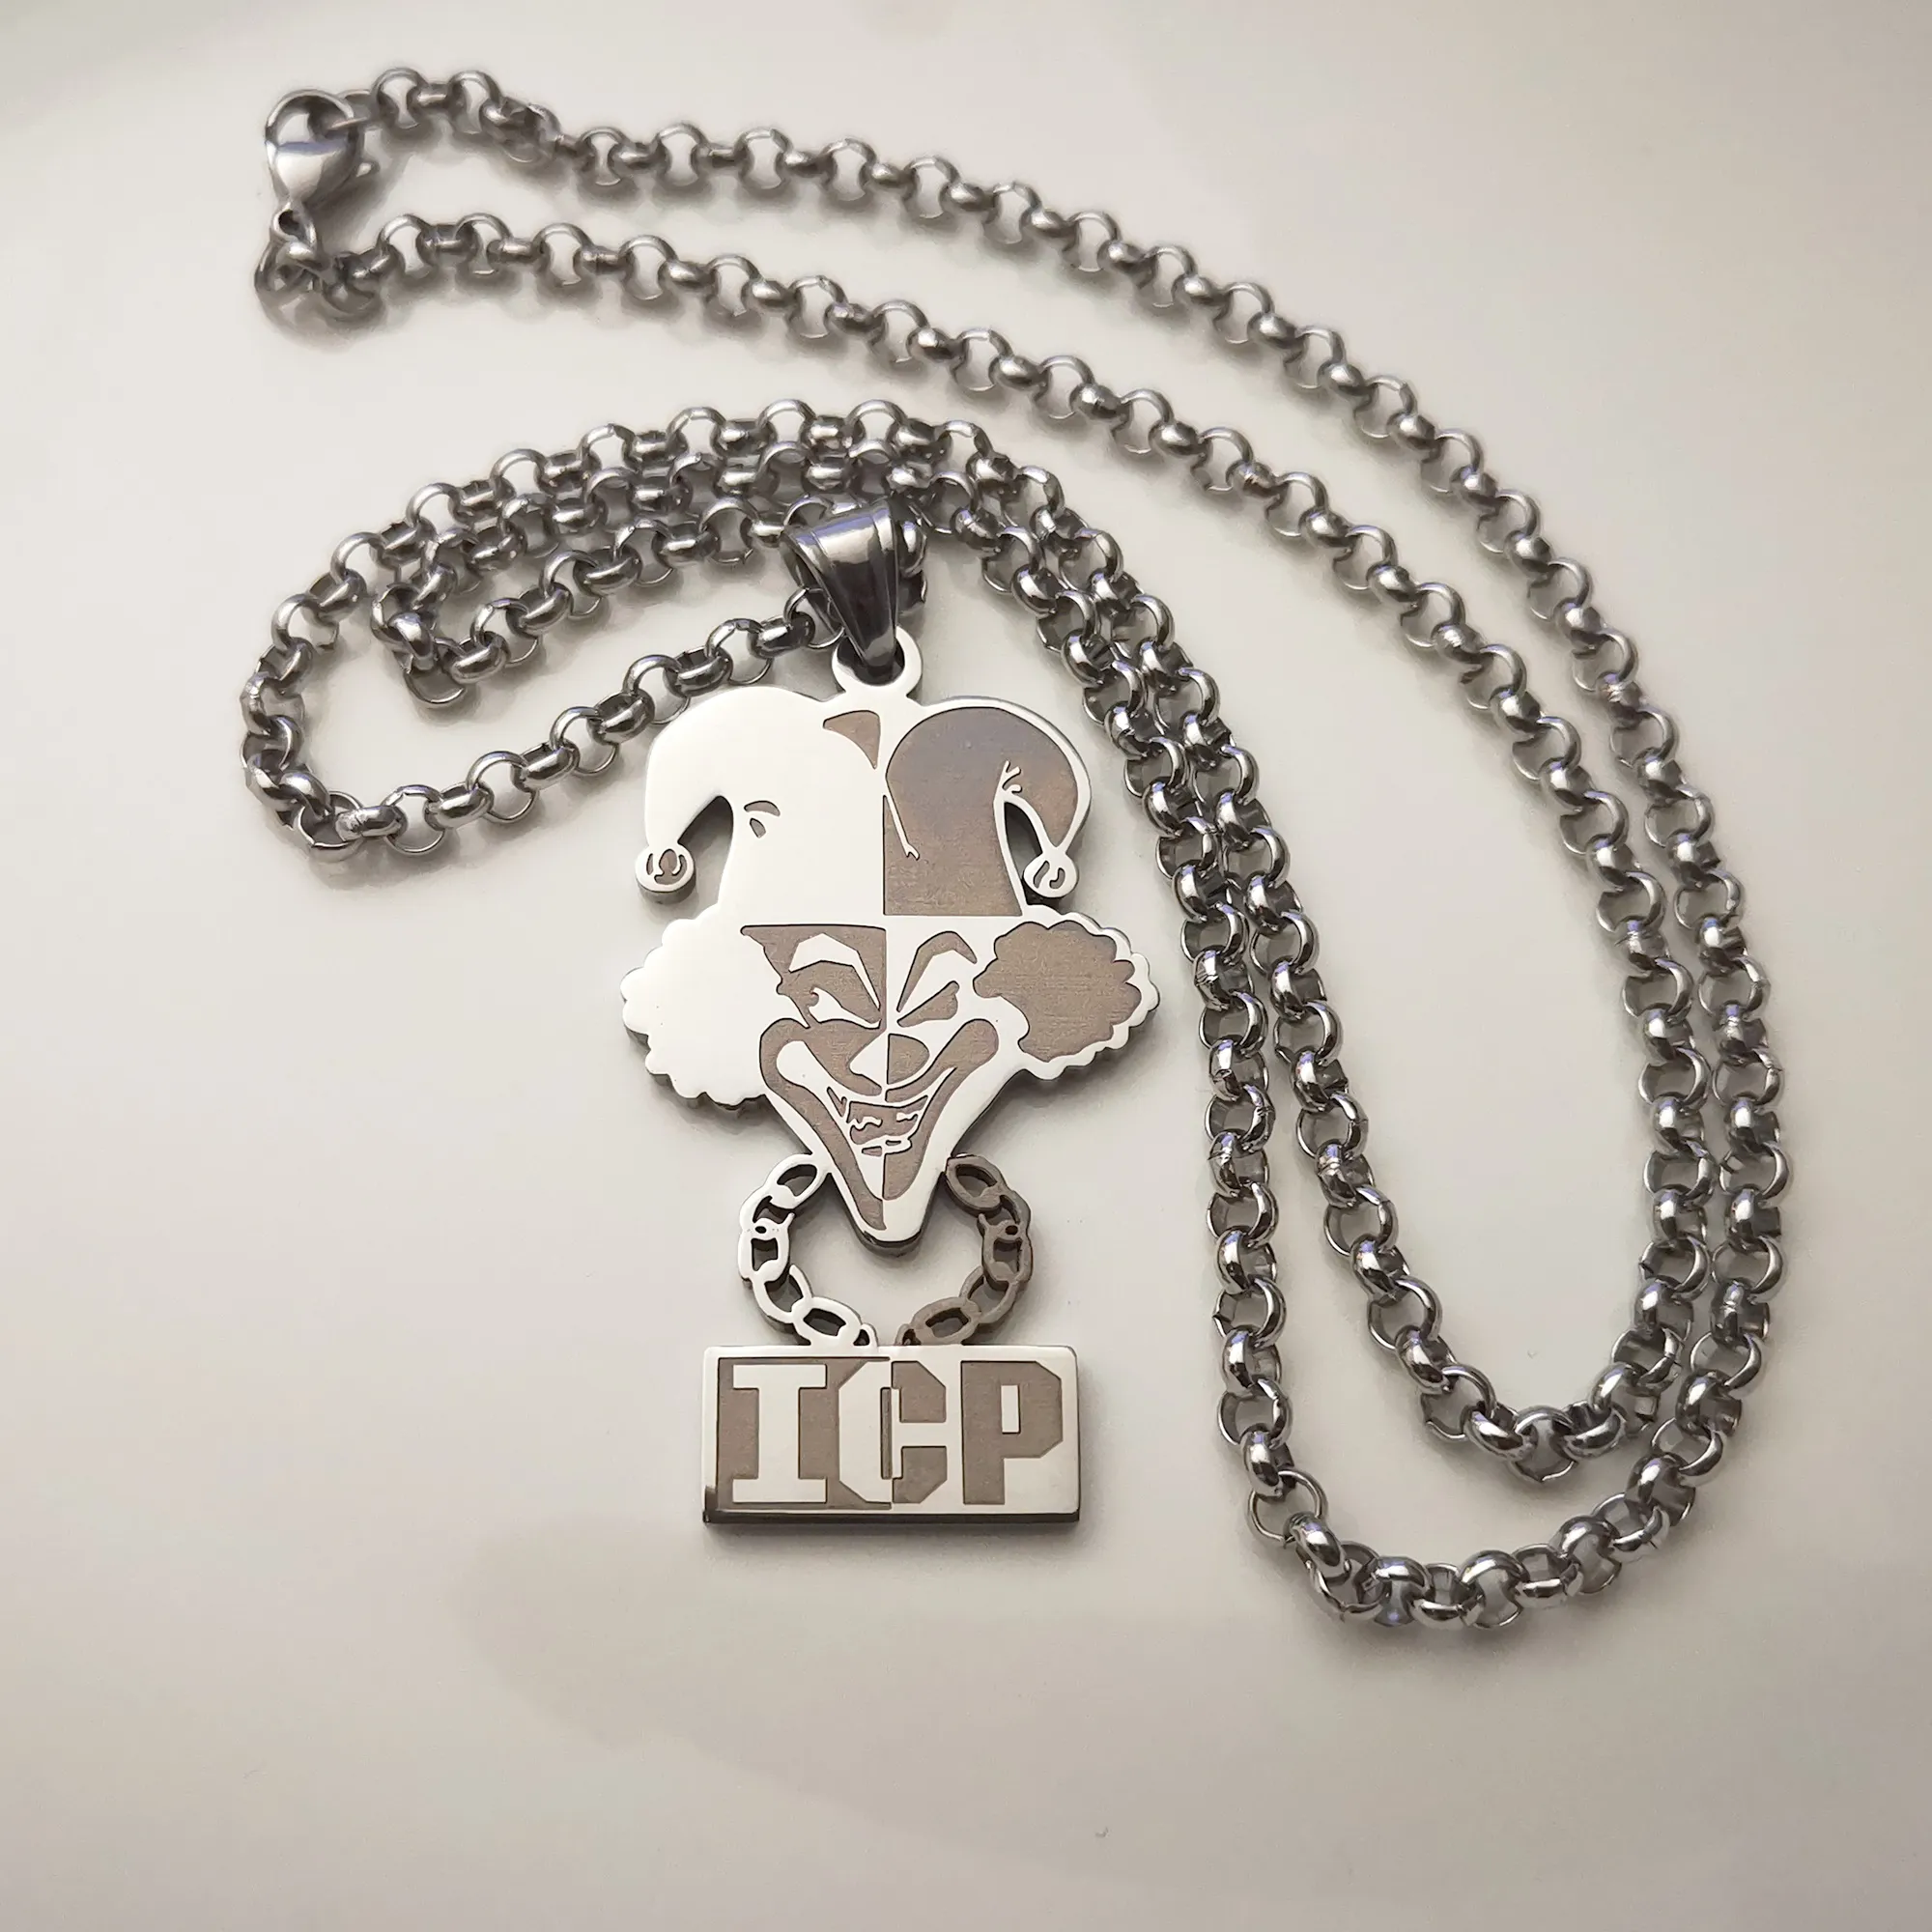 High Polished Silver Stainless Steel ICP CLOWN TWIZTID PENDANT CHARM NECKLACE 4mm 24INCH Rolo CHAIN Jugallo for Mens304I